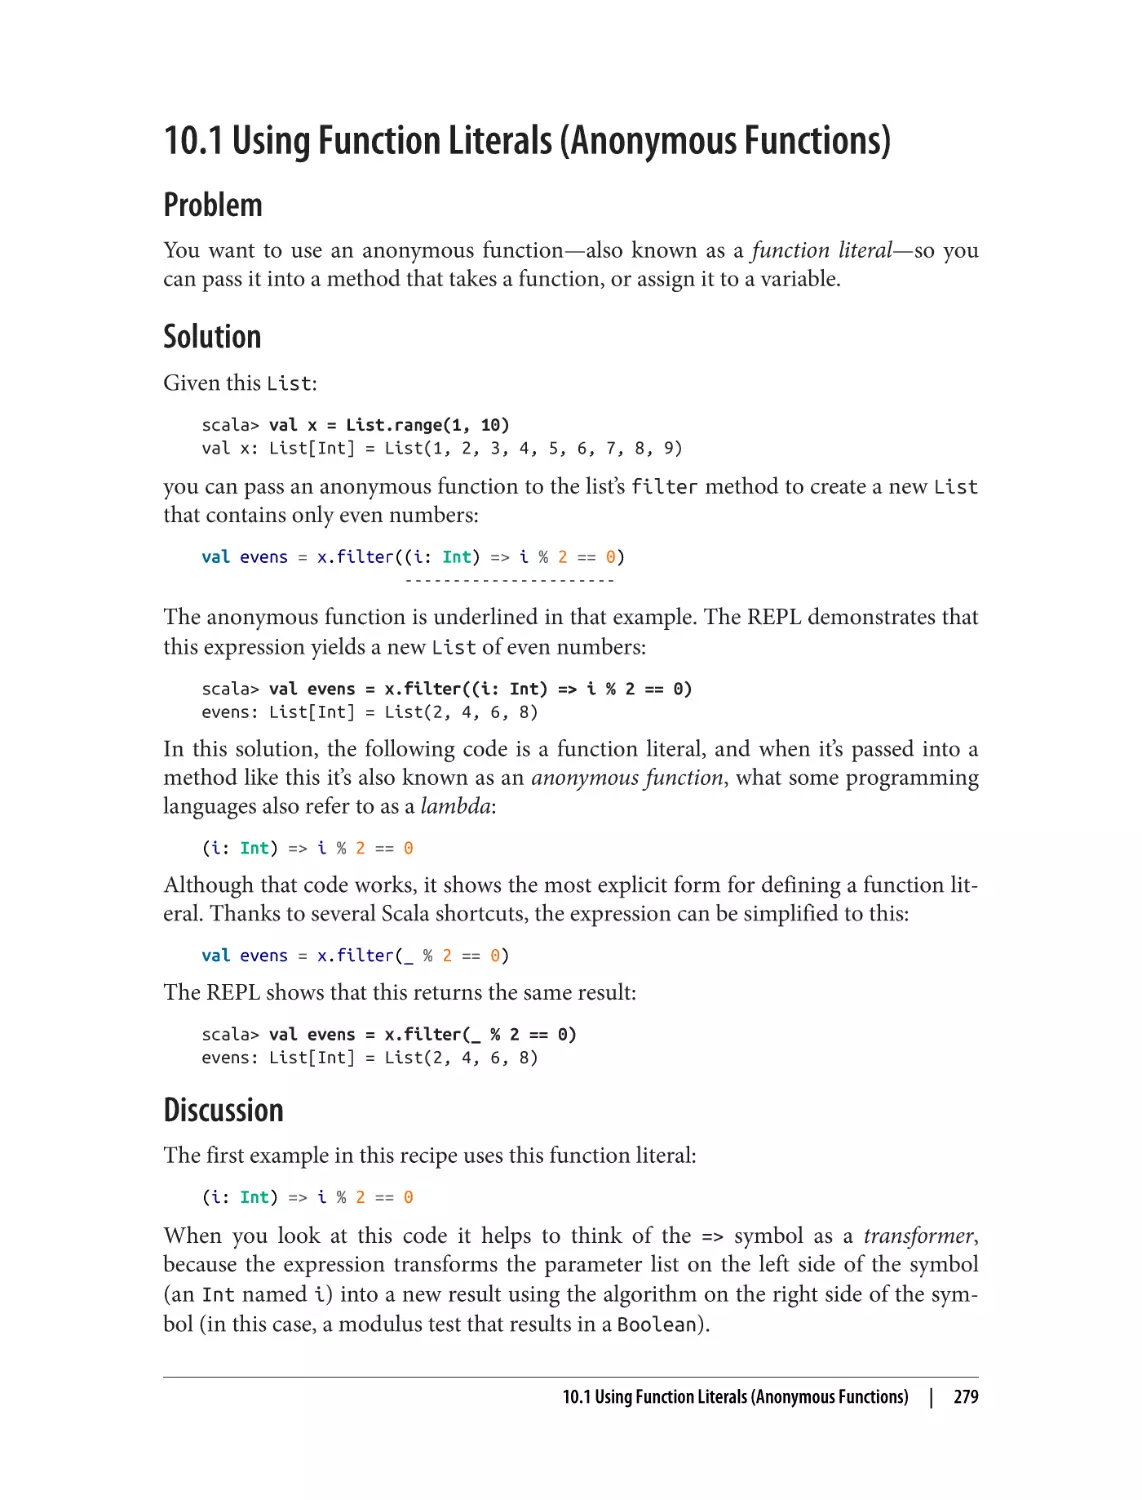 10.1 Using Function Literals (Anonymous Functions)
Problem
Solution
Discussion